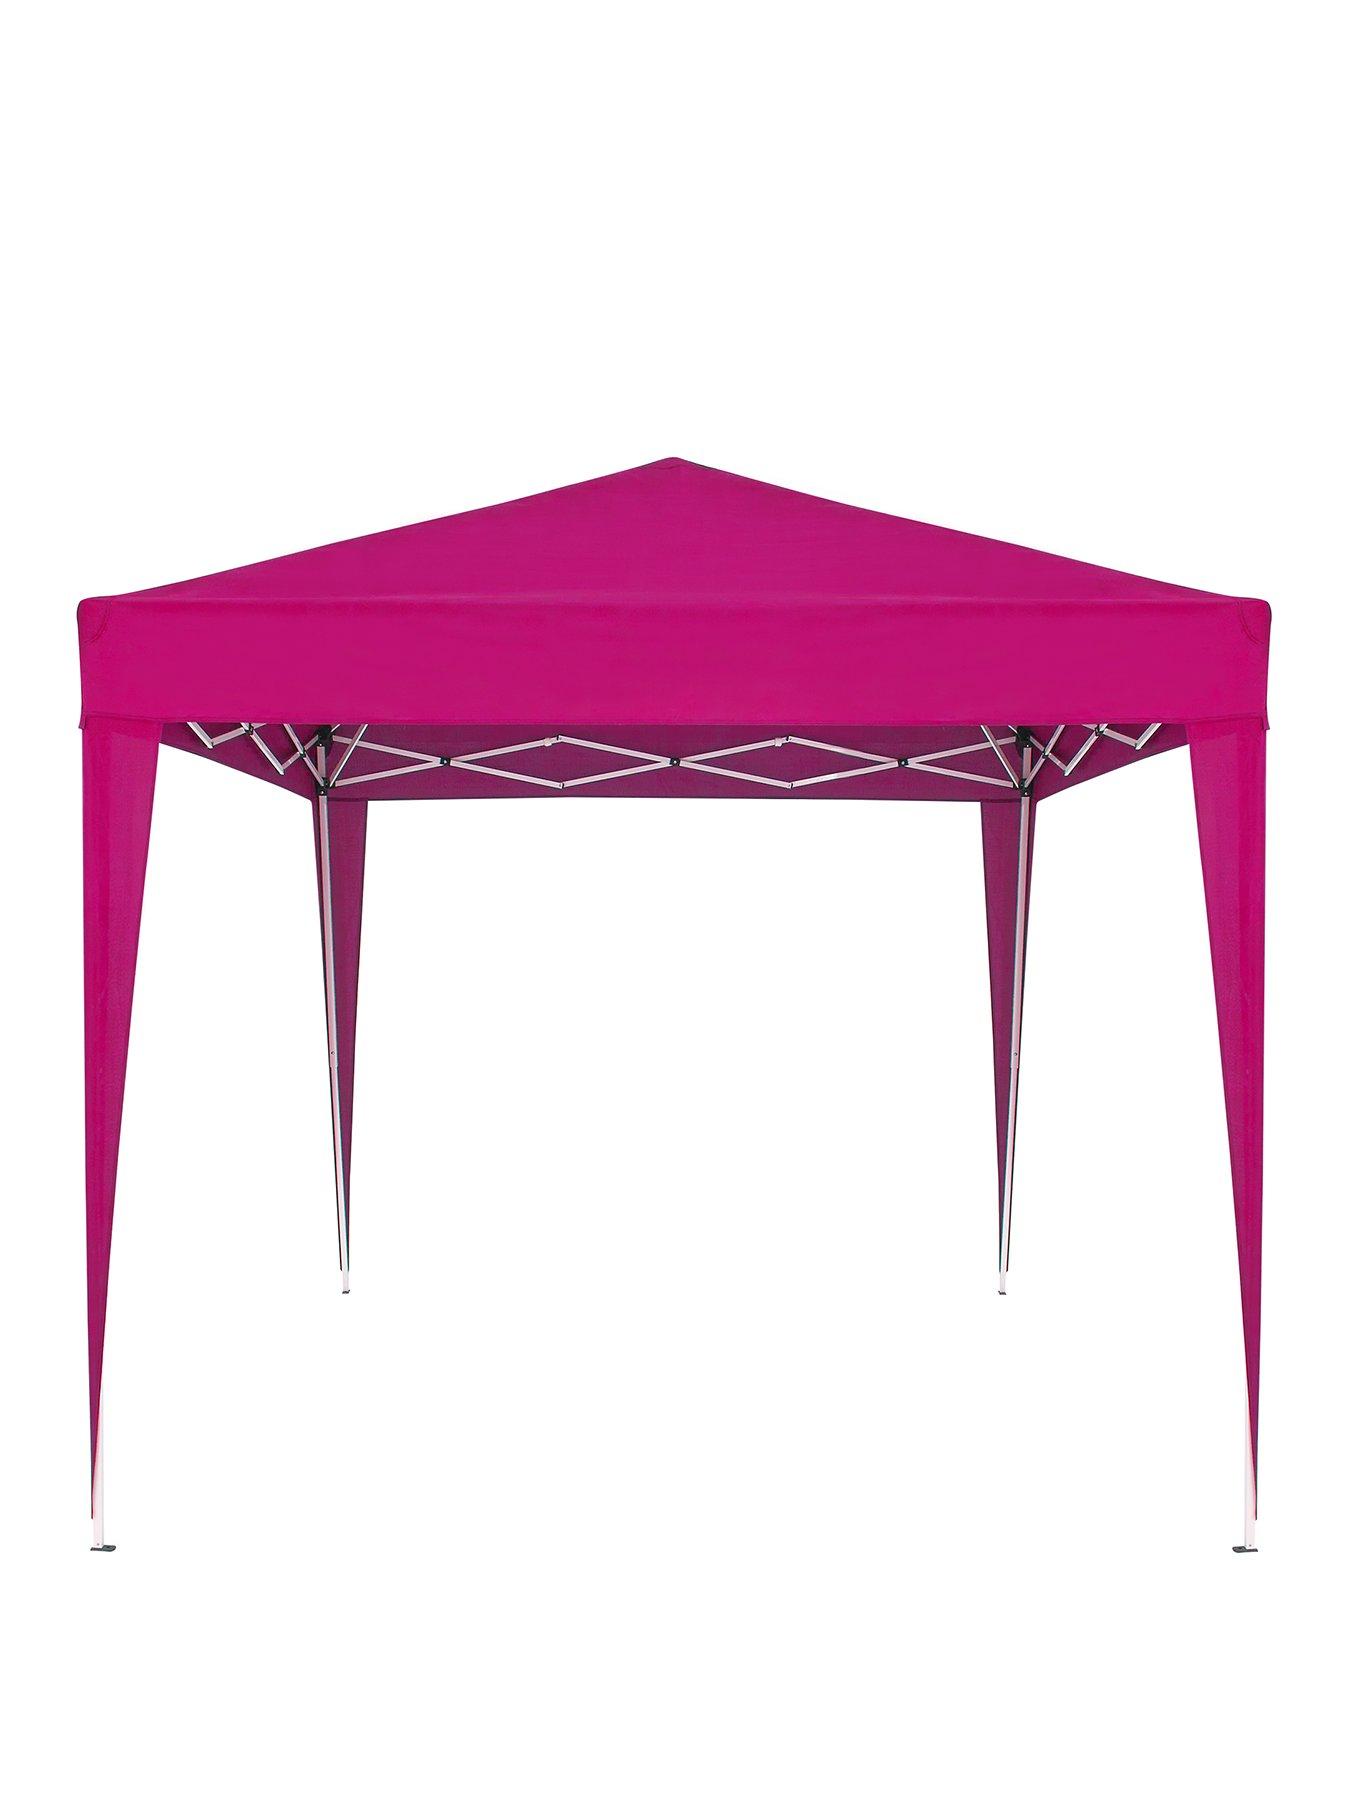 Everyday Large Pop Up Gazebo 2.5M X 2.5M - Pink - Sturdy Metal Frame With Carry Bag